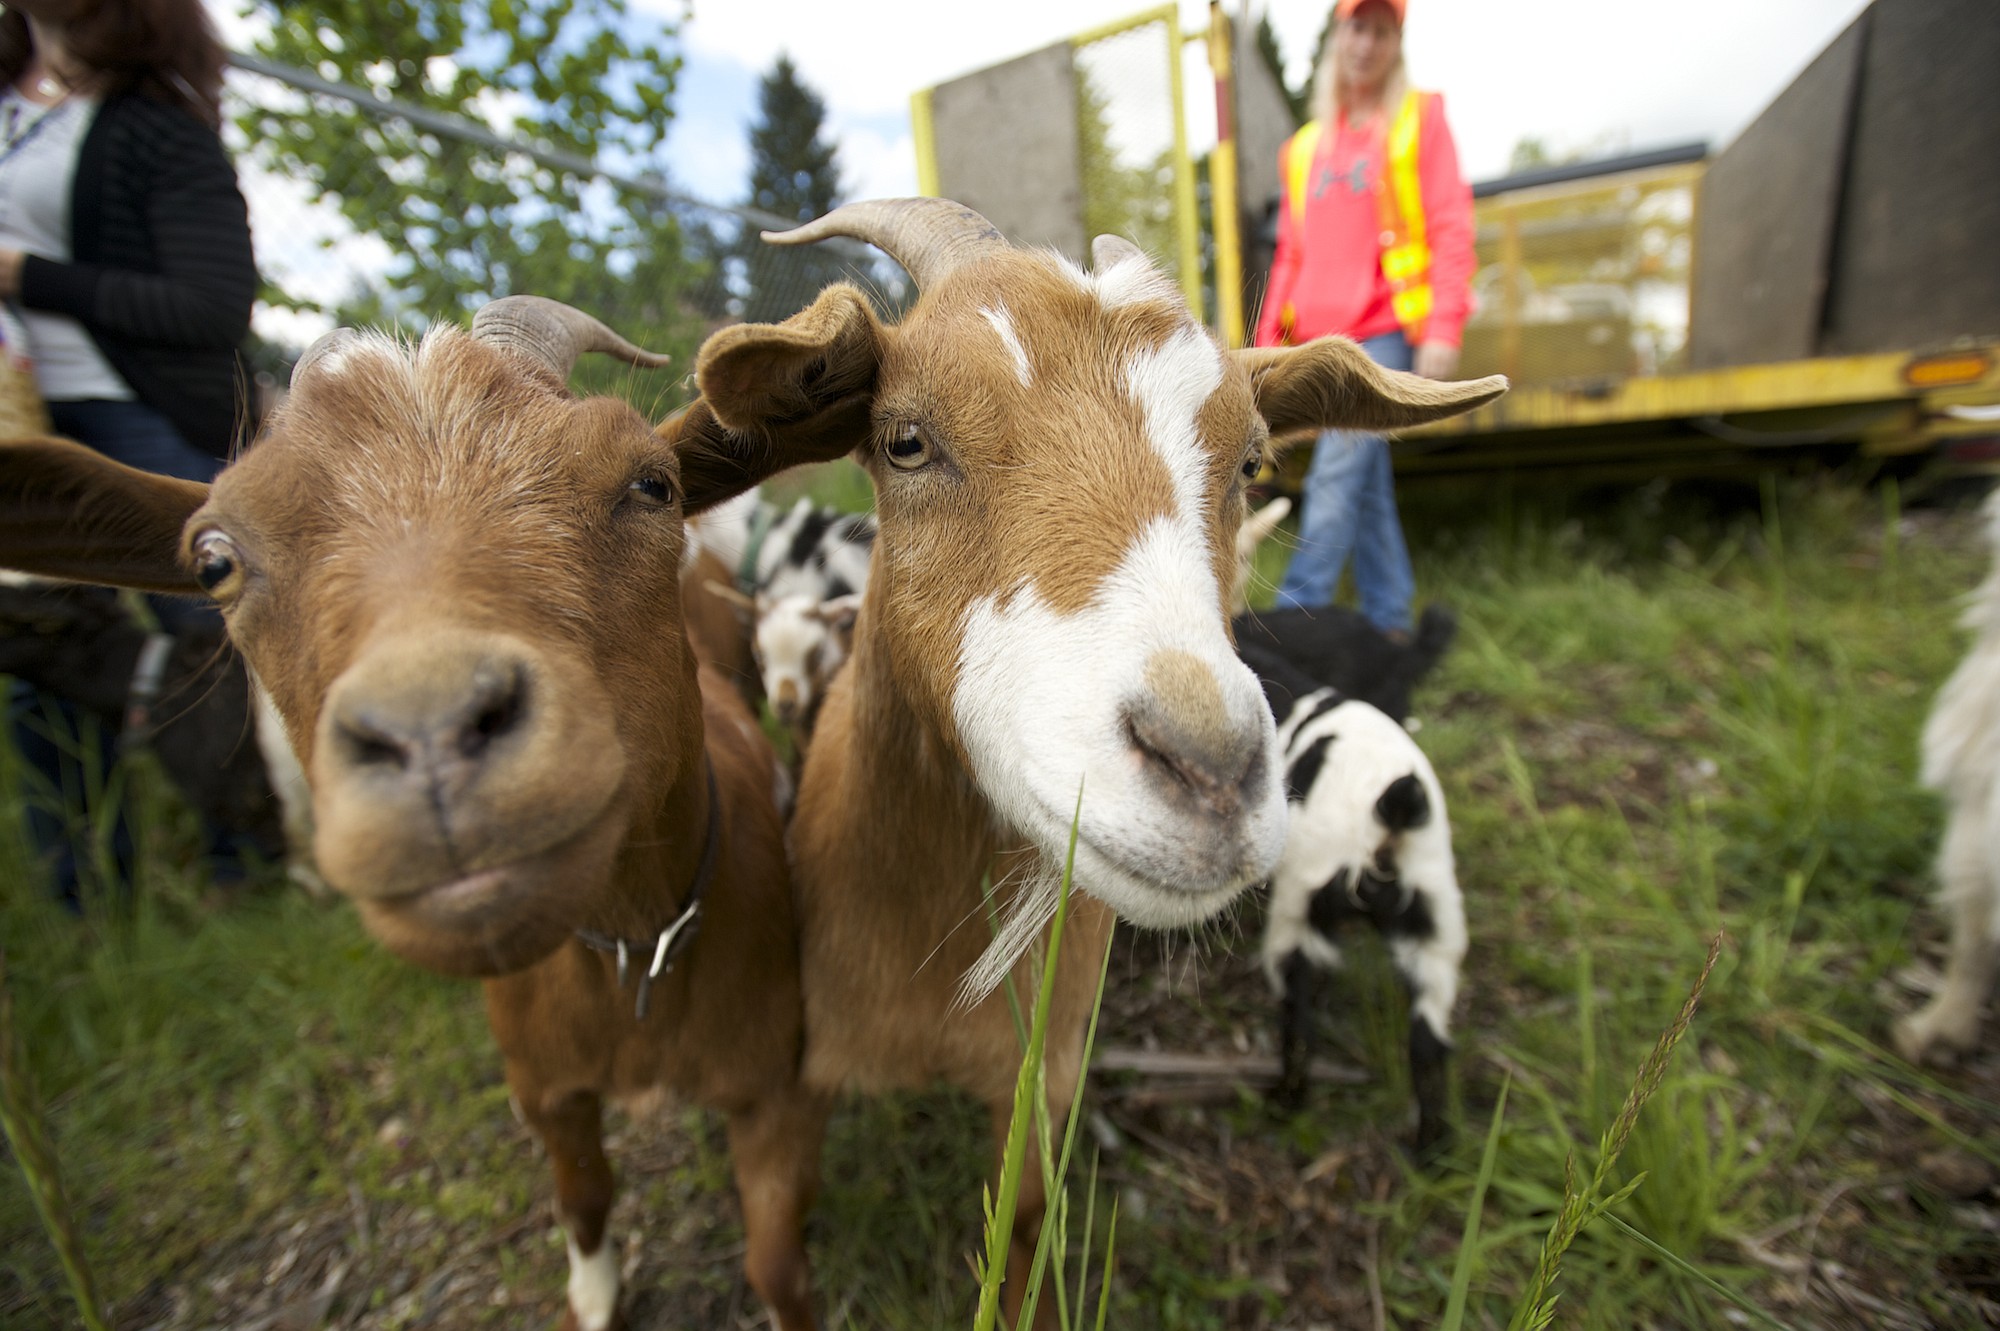 Weed-eating goats begin searching for plants to devour at a site along state Highway 503 in Brush Prairie on Wednesday.